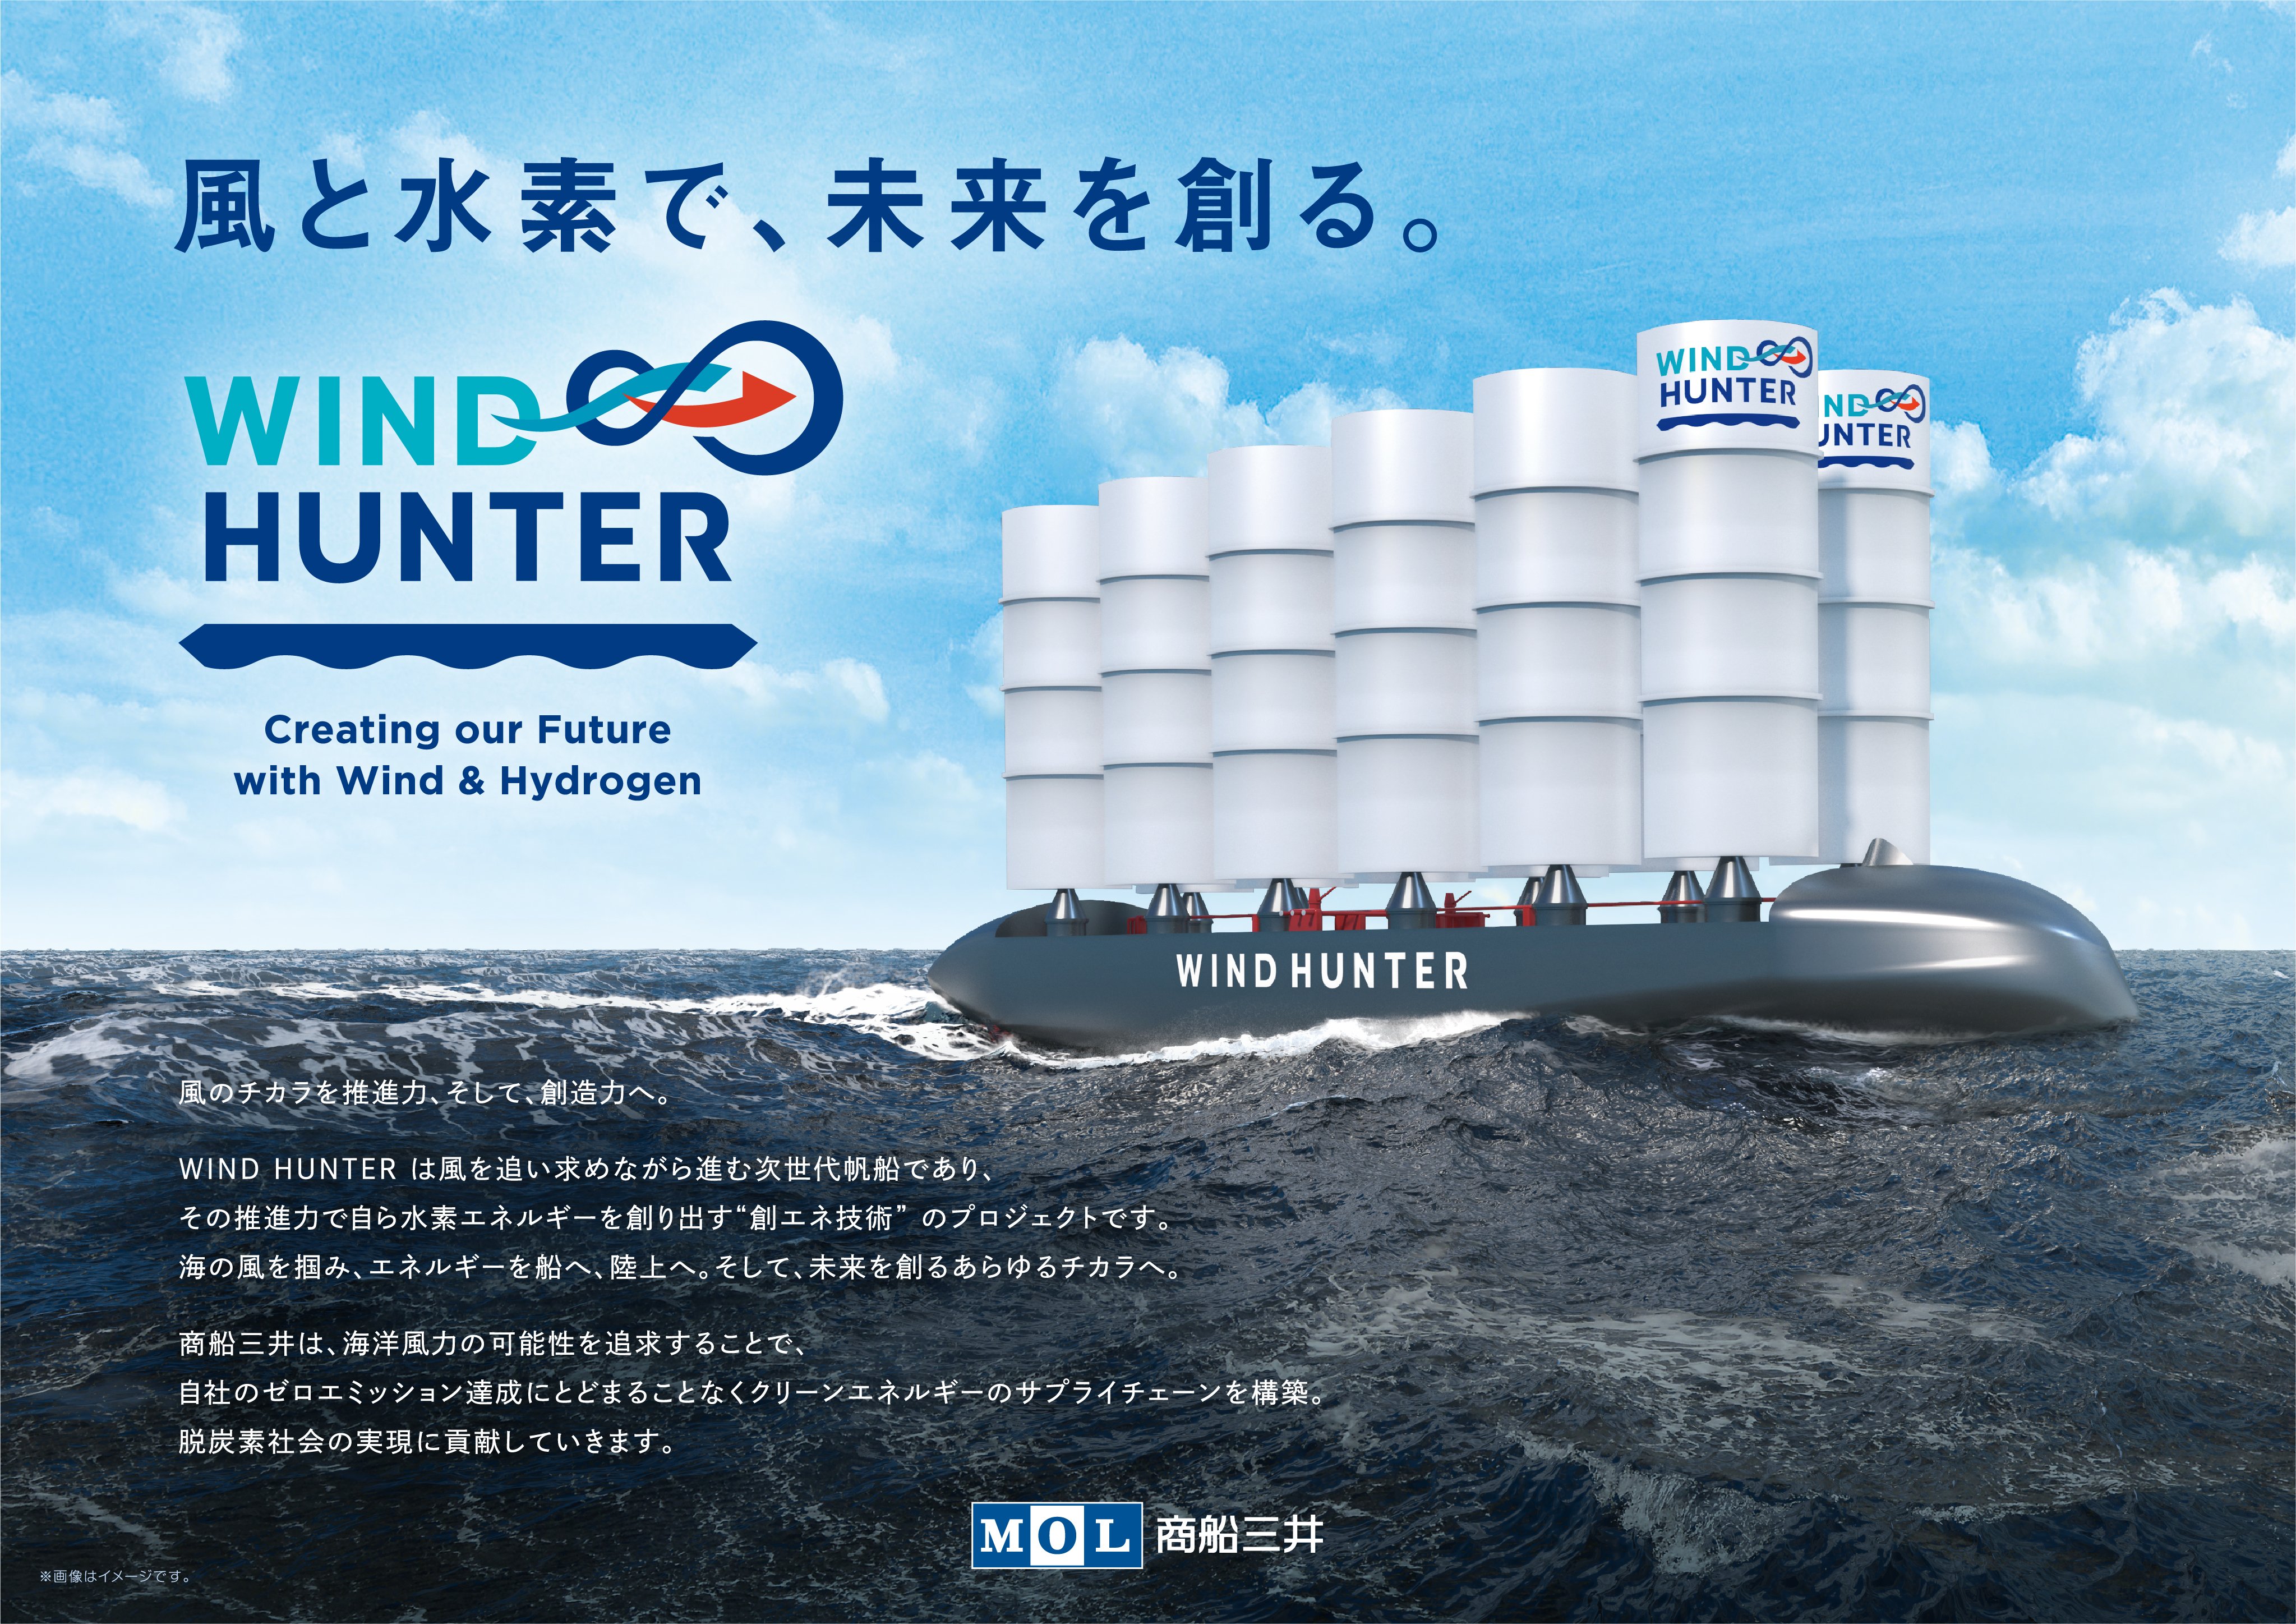 windhunter creating our future with Wind & Hydrogen